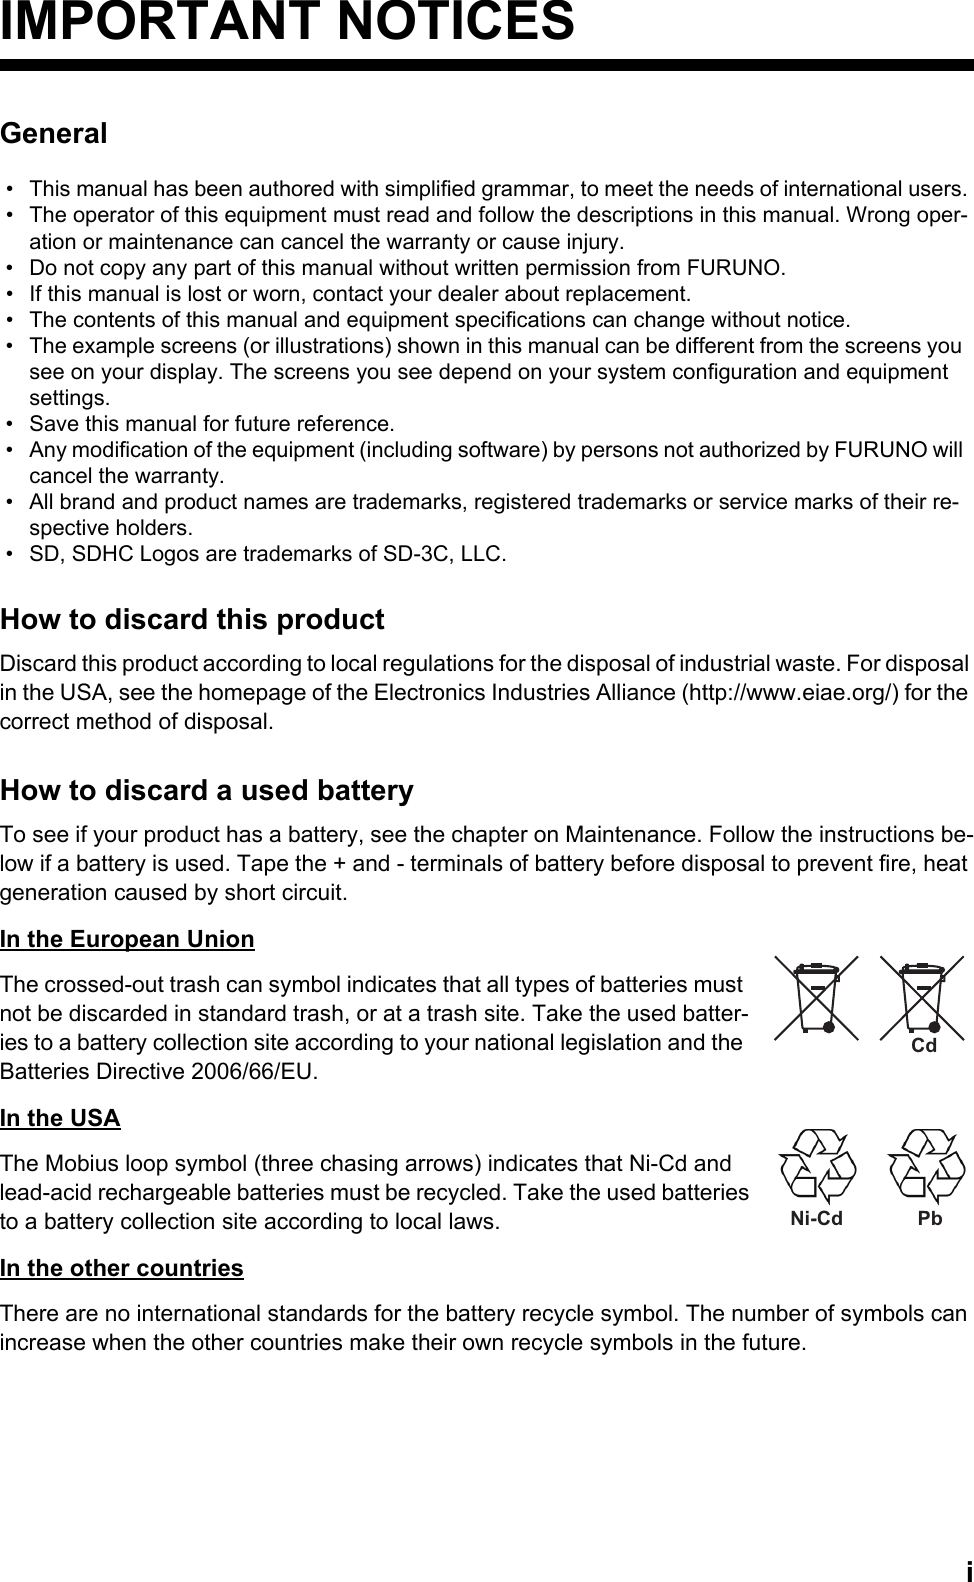 iIMPORTANT NOTICESGeneralHow to discard this productDiscard this product according to local regulations for the disposal of industrial waste. For disposal in the USA, see the homepage of the Electronics Industries Alliance (http://www.eiae.org/) for the correct method of disposal.How to discard a used batteryTo see if your product has a battery, see the chapter on Maintenance. Follow the instructions be-low if a battery is used. Tape the + and - terminals of battery before disposal to prevent fire, heat generation caused by short circuit.In the European UnionThe crossed-out trash can symbol indicates that all types of batteries must not be discarded in standard trash, or at a trash site. Take the used batter-ies to a battery collection site according to your national legislation and the Batteries Directive 2006/66/EU. In the USAThe Mobius loop symbol (three chasing arrows) indicates that Ni-Cd and lead-acid rechargeable batteries must be recycled. Take the used batteries to a battery collection site according to local laws.In the other countriesThere are no international standards for the battery recycle symbol. The number of symbols can increase when the other countries make their own recycle symbols in the future.•  This manual has been authored with simplified grammar, to meet the needs of international users.•  The operator of this equipment must read and follow the descriptions in this manual. Wrong oper-ation or maintenance can cancel the warranty or cause injury.•  Do not copy any part of this manual without written permission from FURUNO.•  If this manual is lost or worn, contact your dealer about replacement.•  The contents of this manual and equipment specifications can change without notice.•  The example screens (or illustrations) shown in this manual can be different from the screens you see on your display. The screens you see depend on your system configuration and equipment settings.•  Save this manual for future reference.•  Any modification of the equipment (including software) by persons not authorized by FURUNO will cancel the warranty.•  All brand and product names are trademarks, registered trademarks or service marks of their re-spective holders.•  SD, SDHC Logos are trademarks of SD-3C, LLC.CdNi-Cd Pb